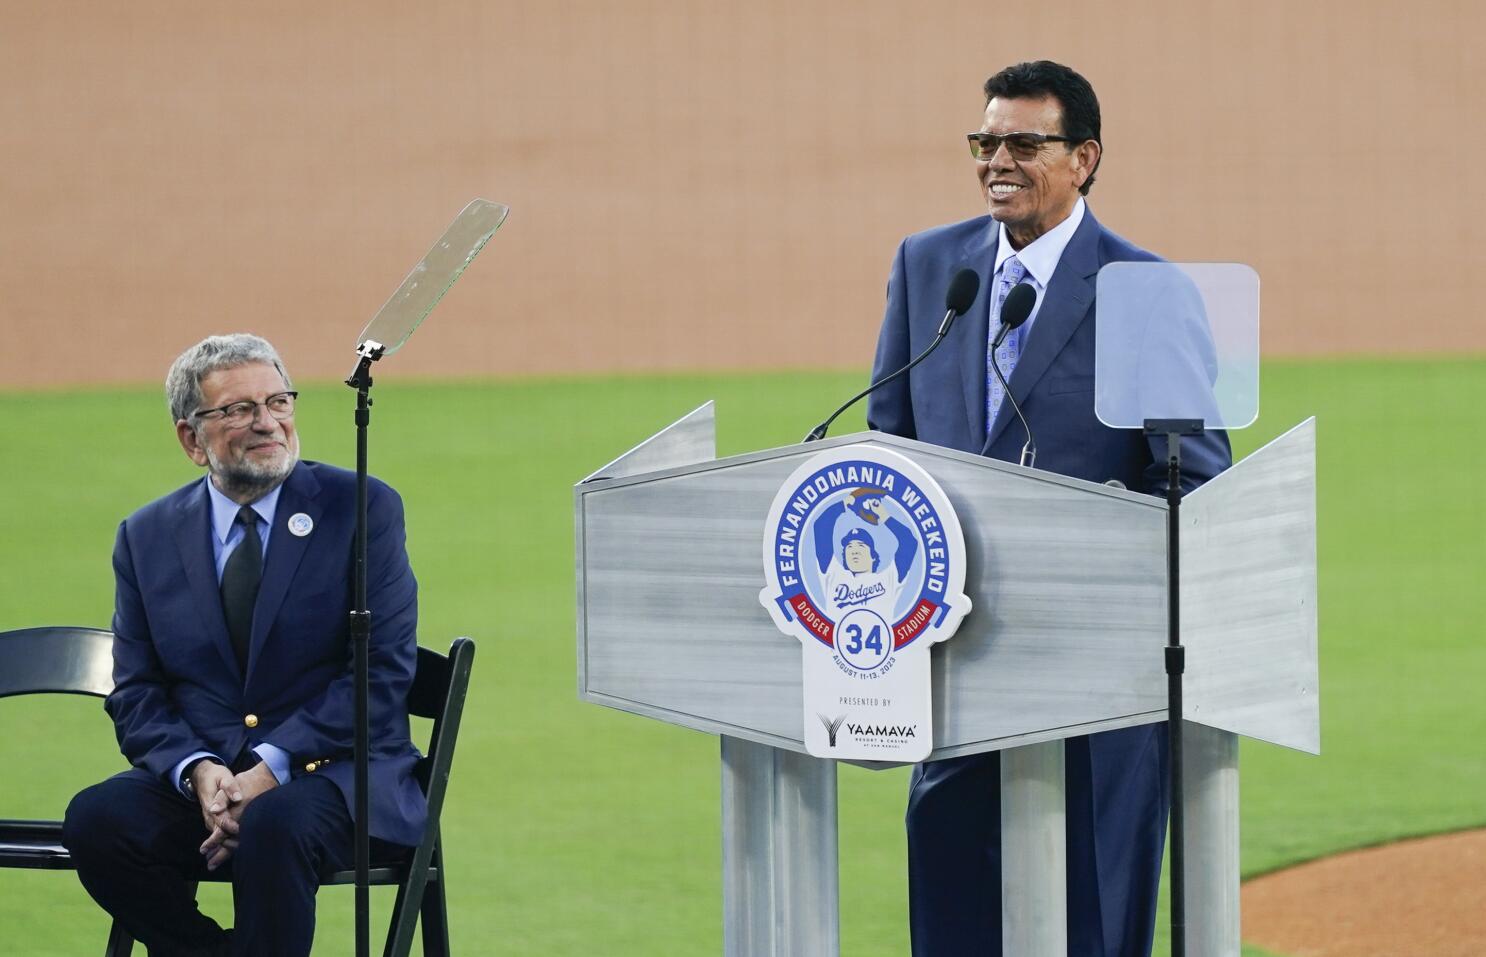 The Dodgers have retired Fernando Valenzuela's number. Does he have a path  to Cooperstown?